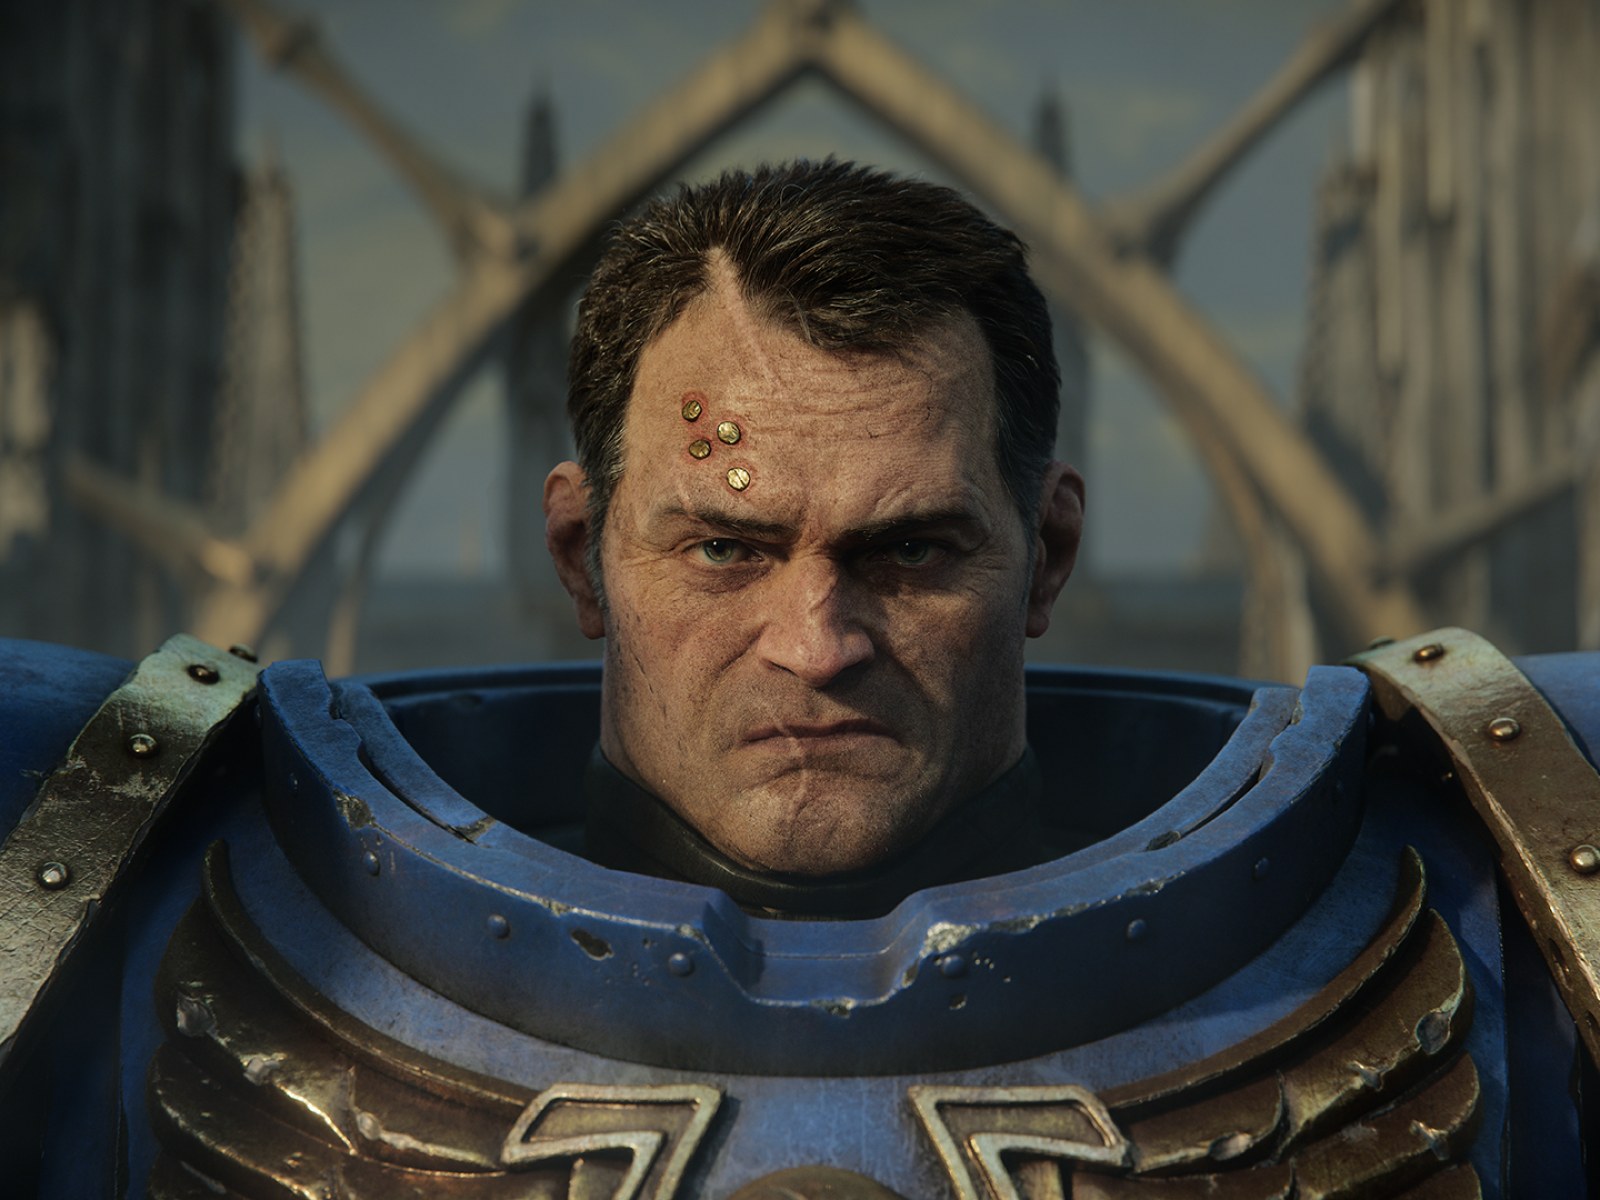 Warhammer 40K: Space Marine' Is Getting a Sequel—Here's All You Need To Know